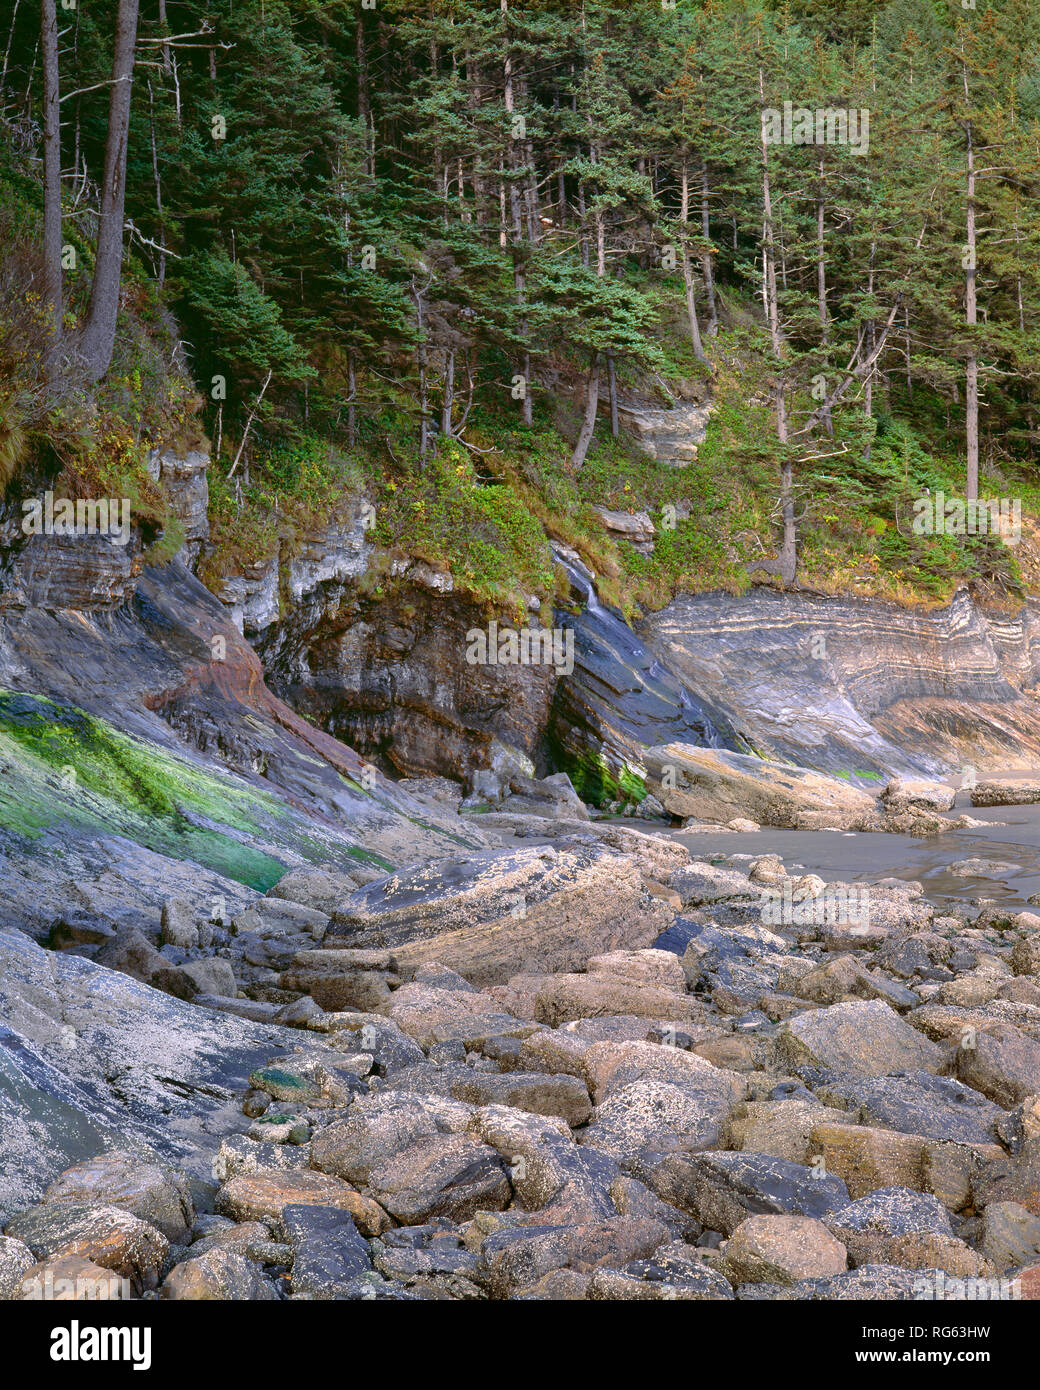 USA, Oregon, Oswald West State Park, Coastal forest of Sitka spruce begins above a rocky intertidal area exposed at low tide. Stock Photo